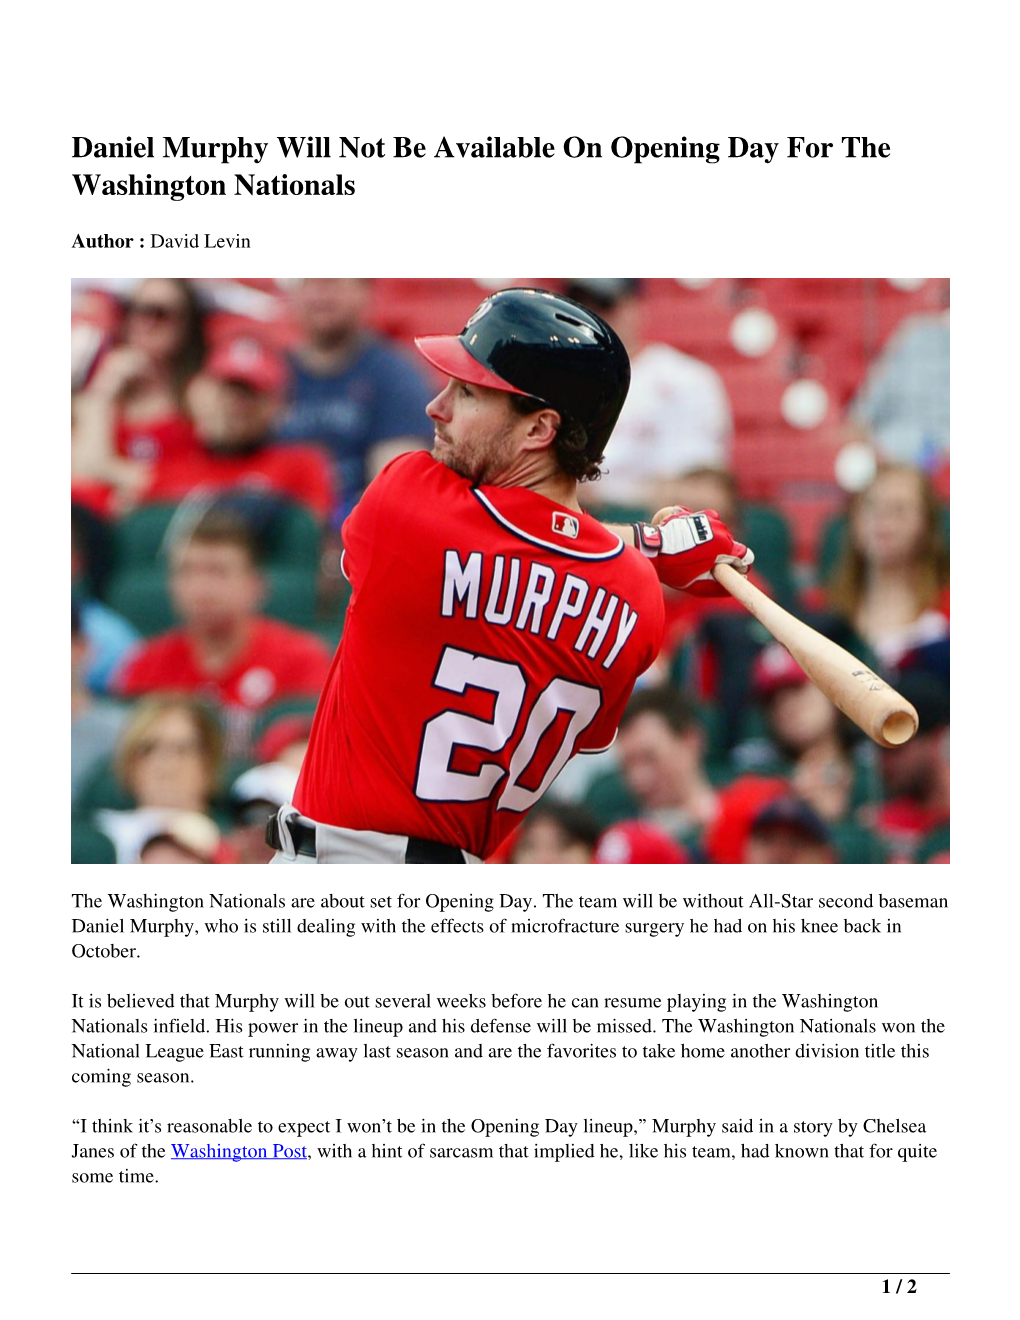 Daniel Murphy Will Not Be Available on Opening Day for the Washington Nationals